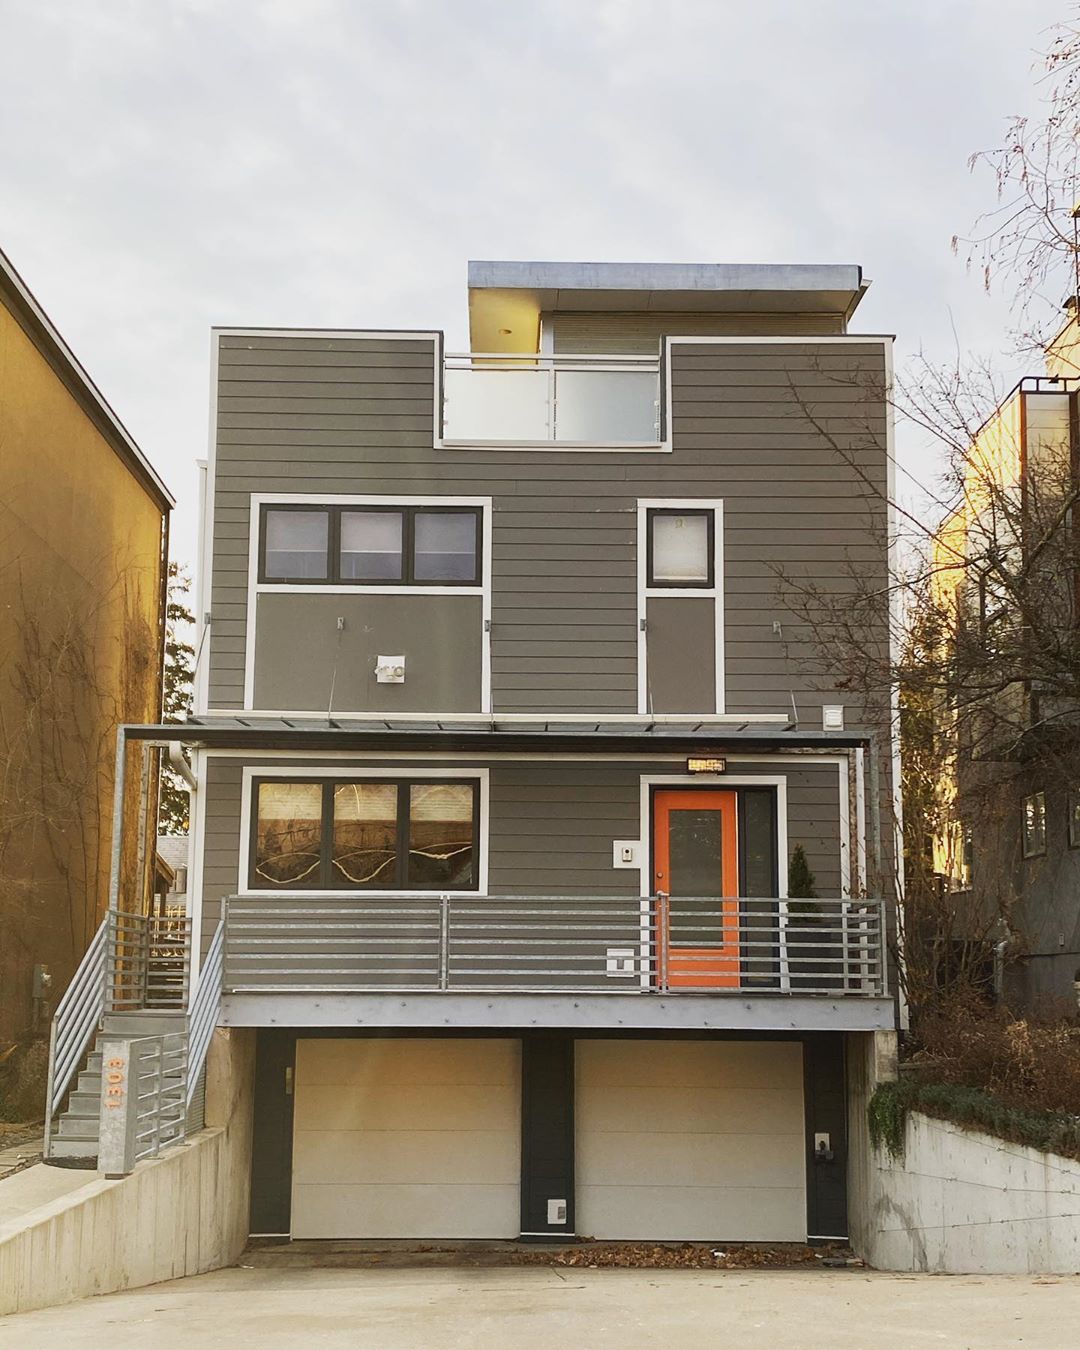 Two-story modern gray home with orange door. Photo by Instagram user @discoverkc